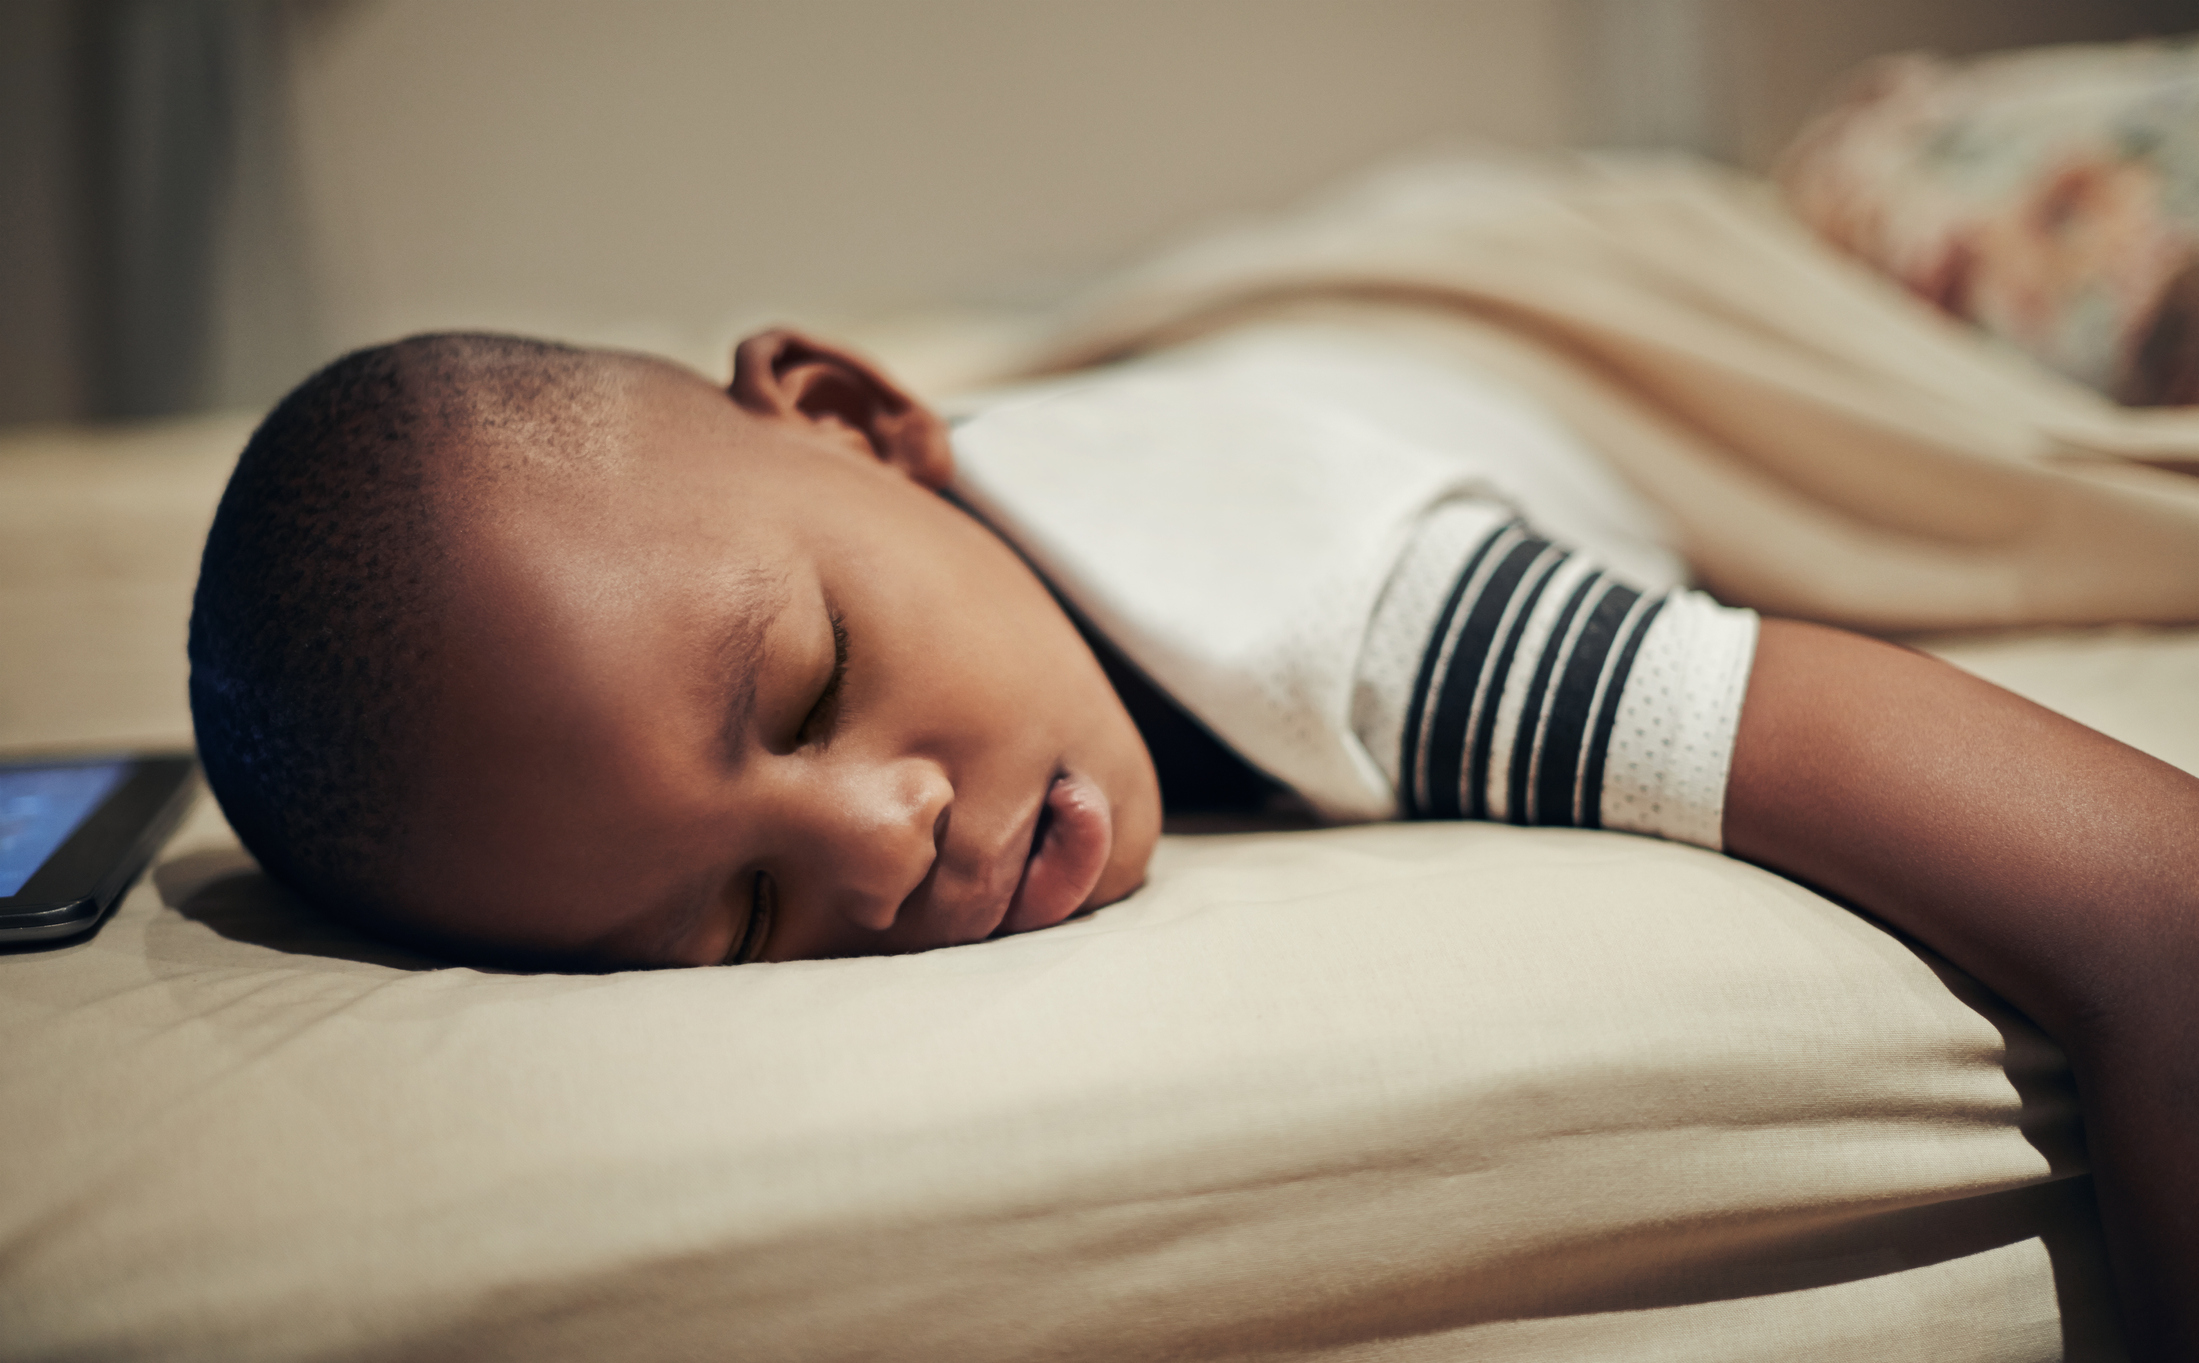 The study links structural changes in the brain to behavioral problems in children who snore